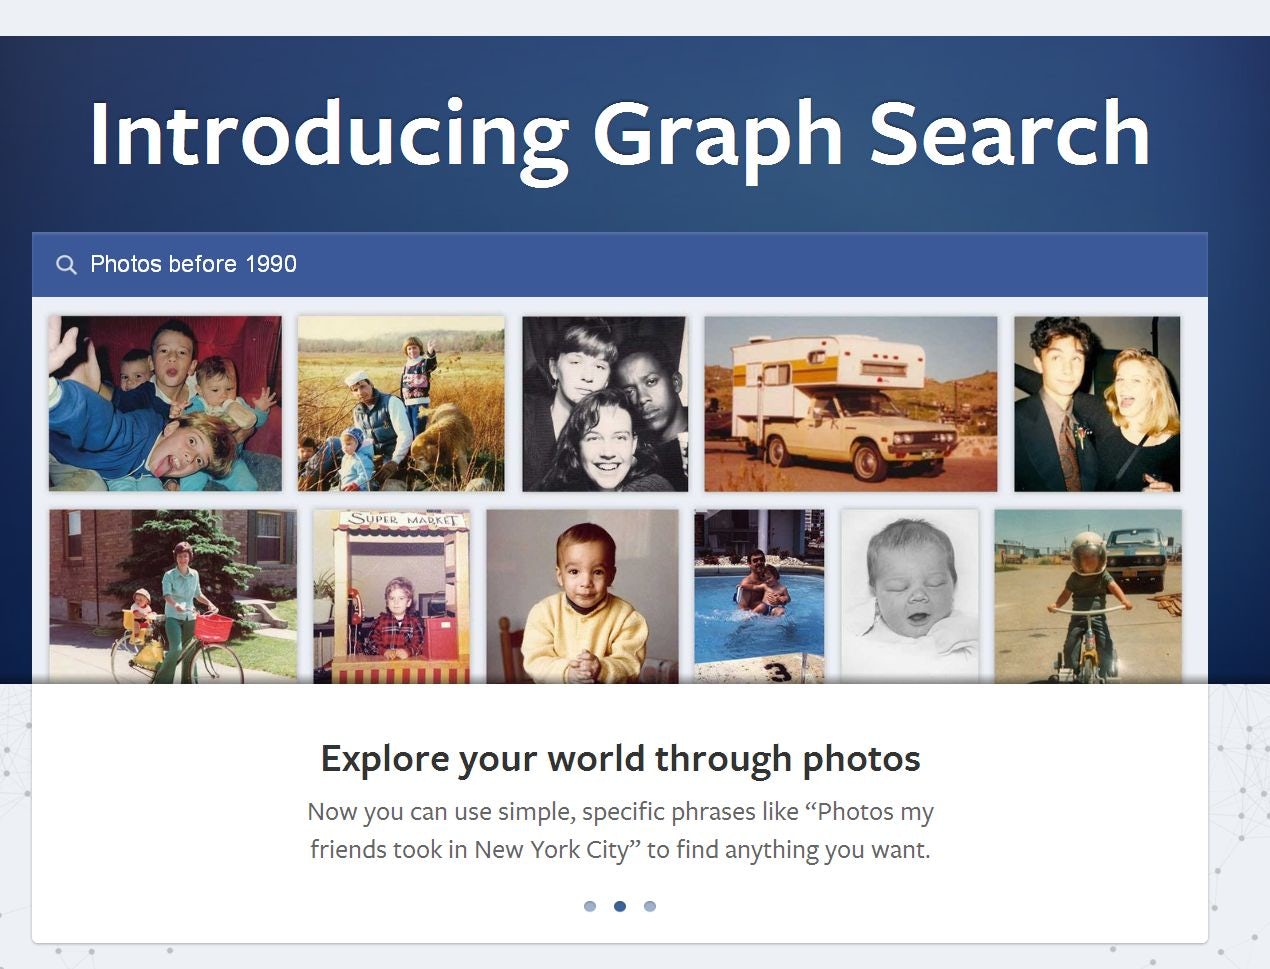 FacebookGraphSearch-Product-2013